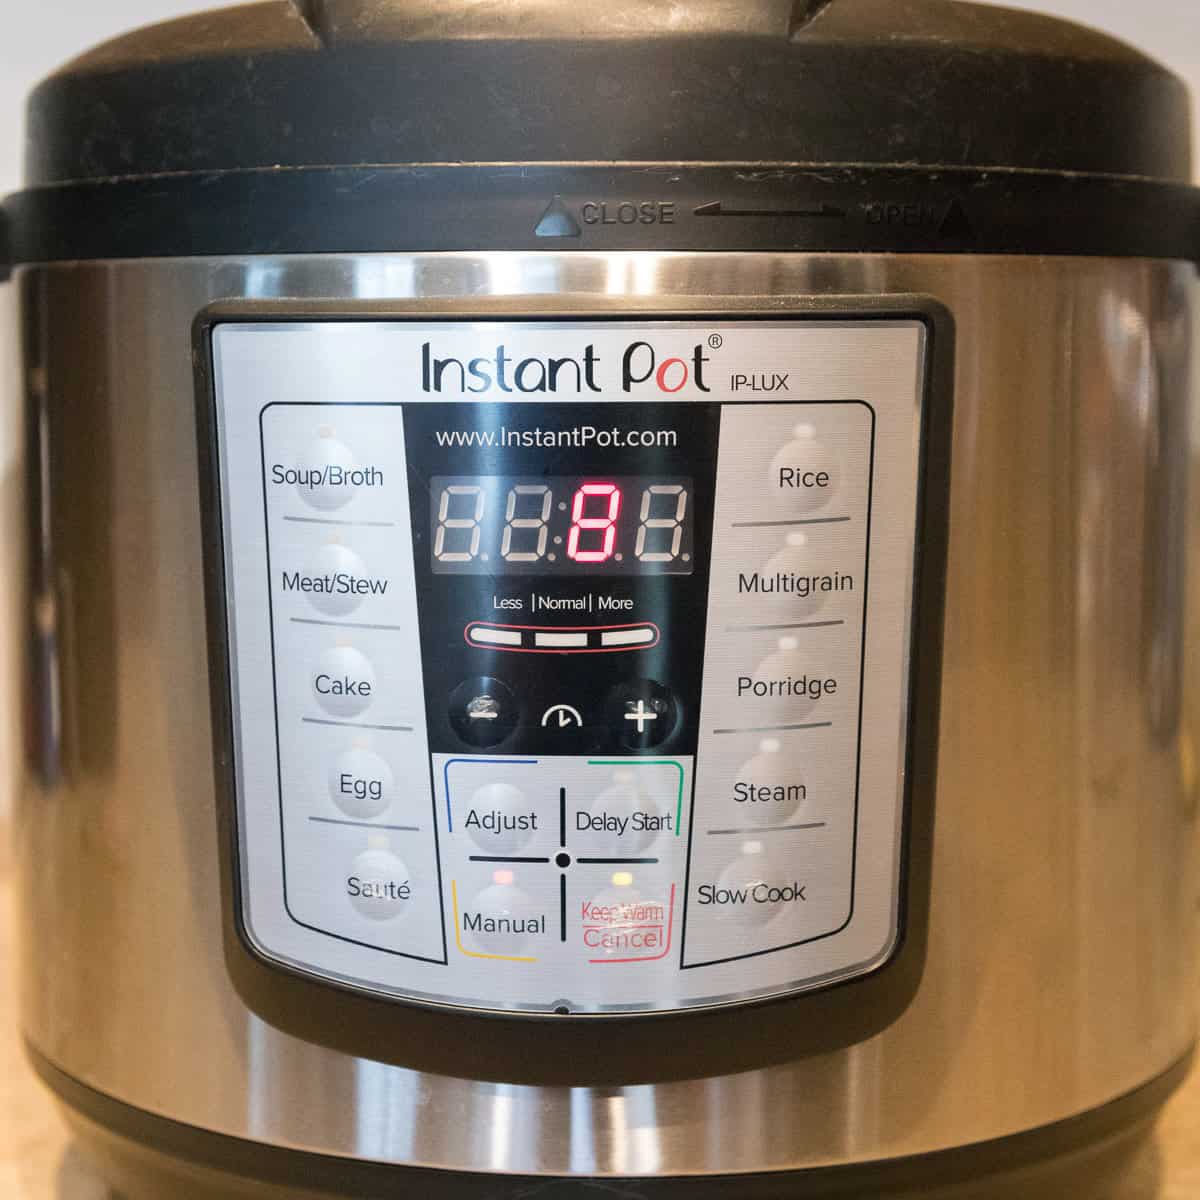 Set the Instant Pot to manual for eight minutes to cook the spaghetti noodles.